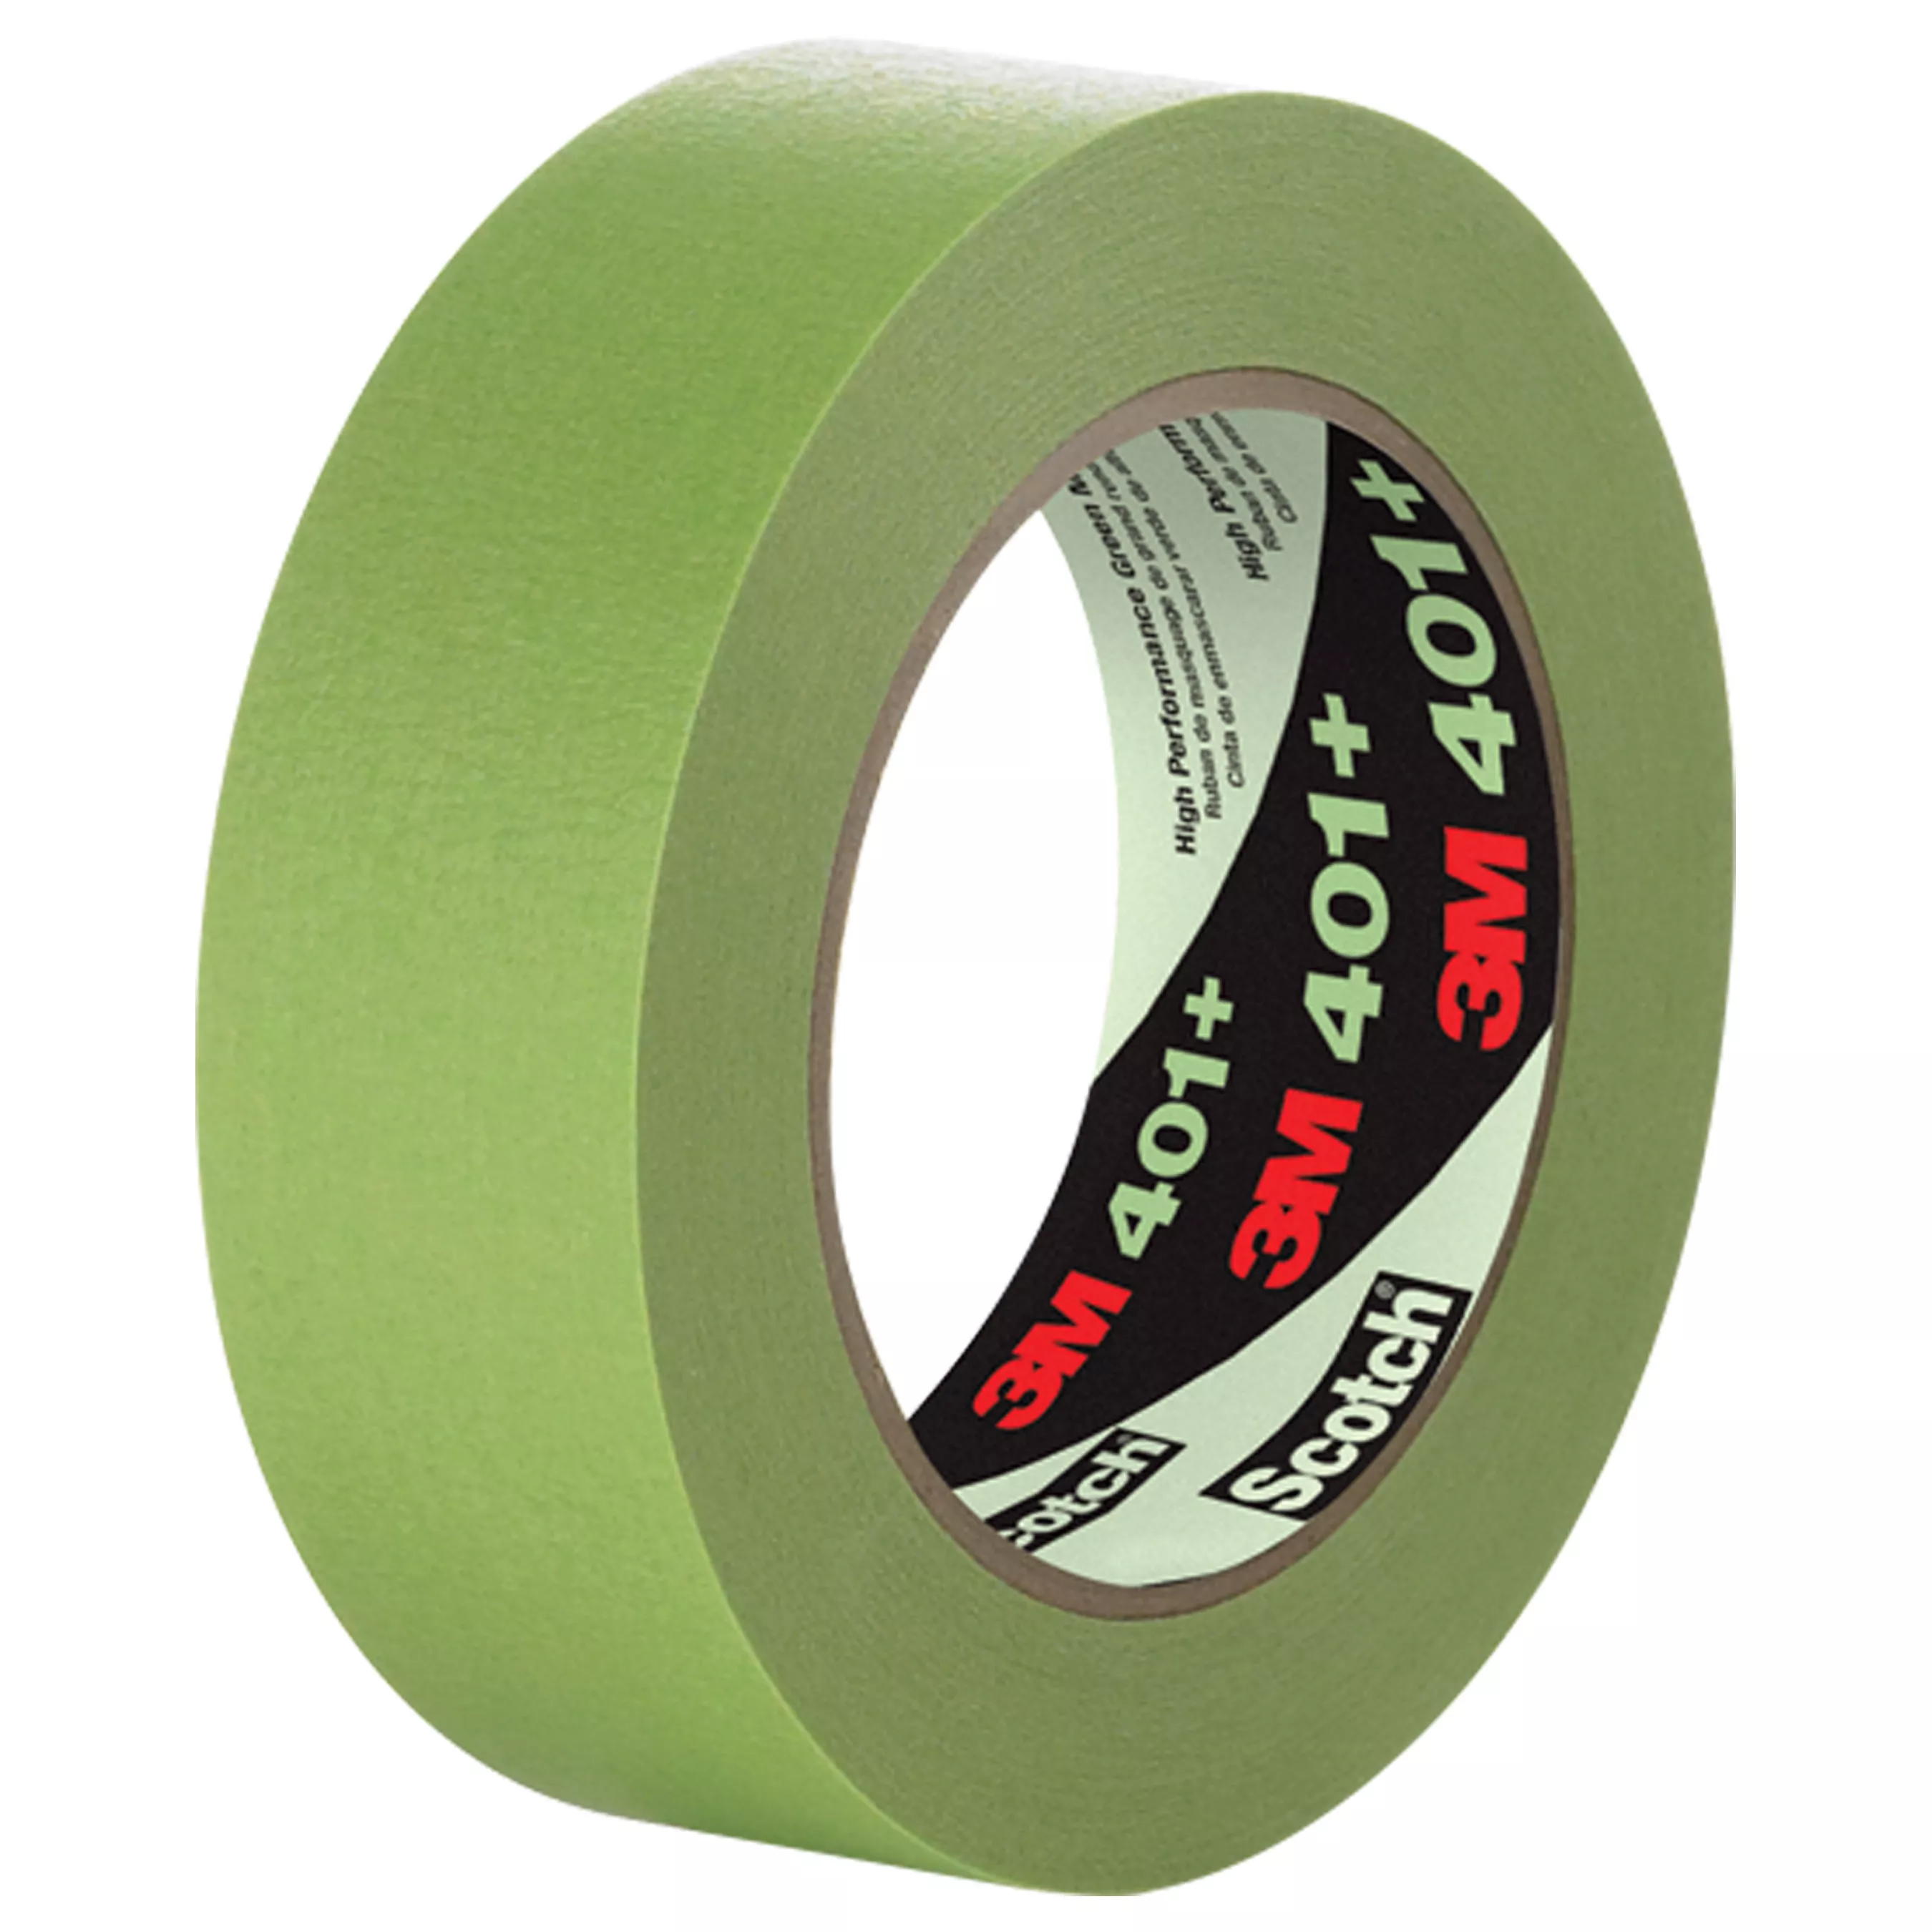 3M™ High Performance Green Masking Tape 401+, 1490 mm x 55 m, 6.7 mil,
untrimmed, 1 Roll/Case